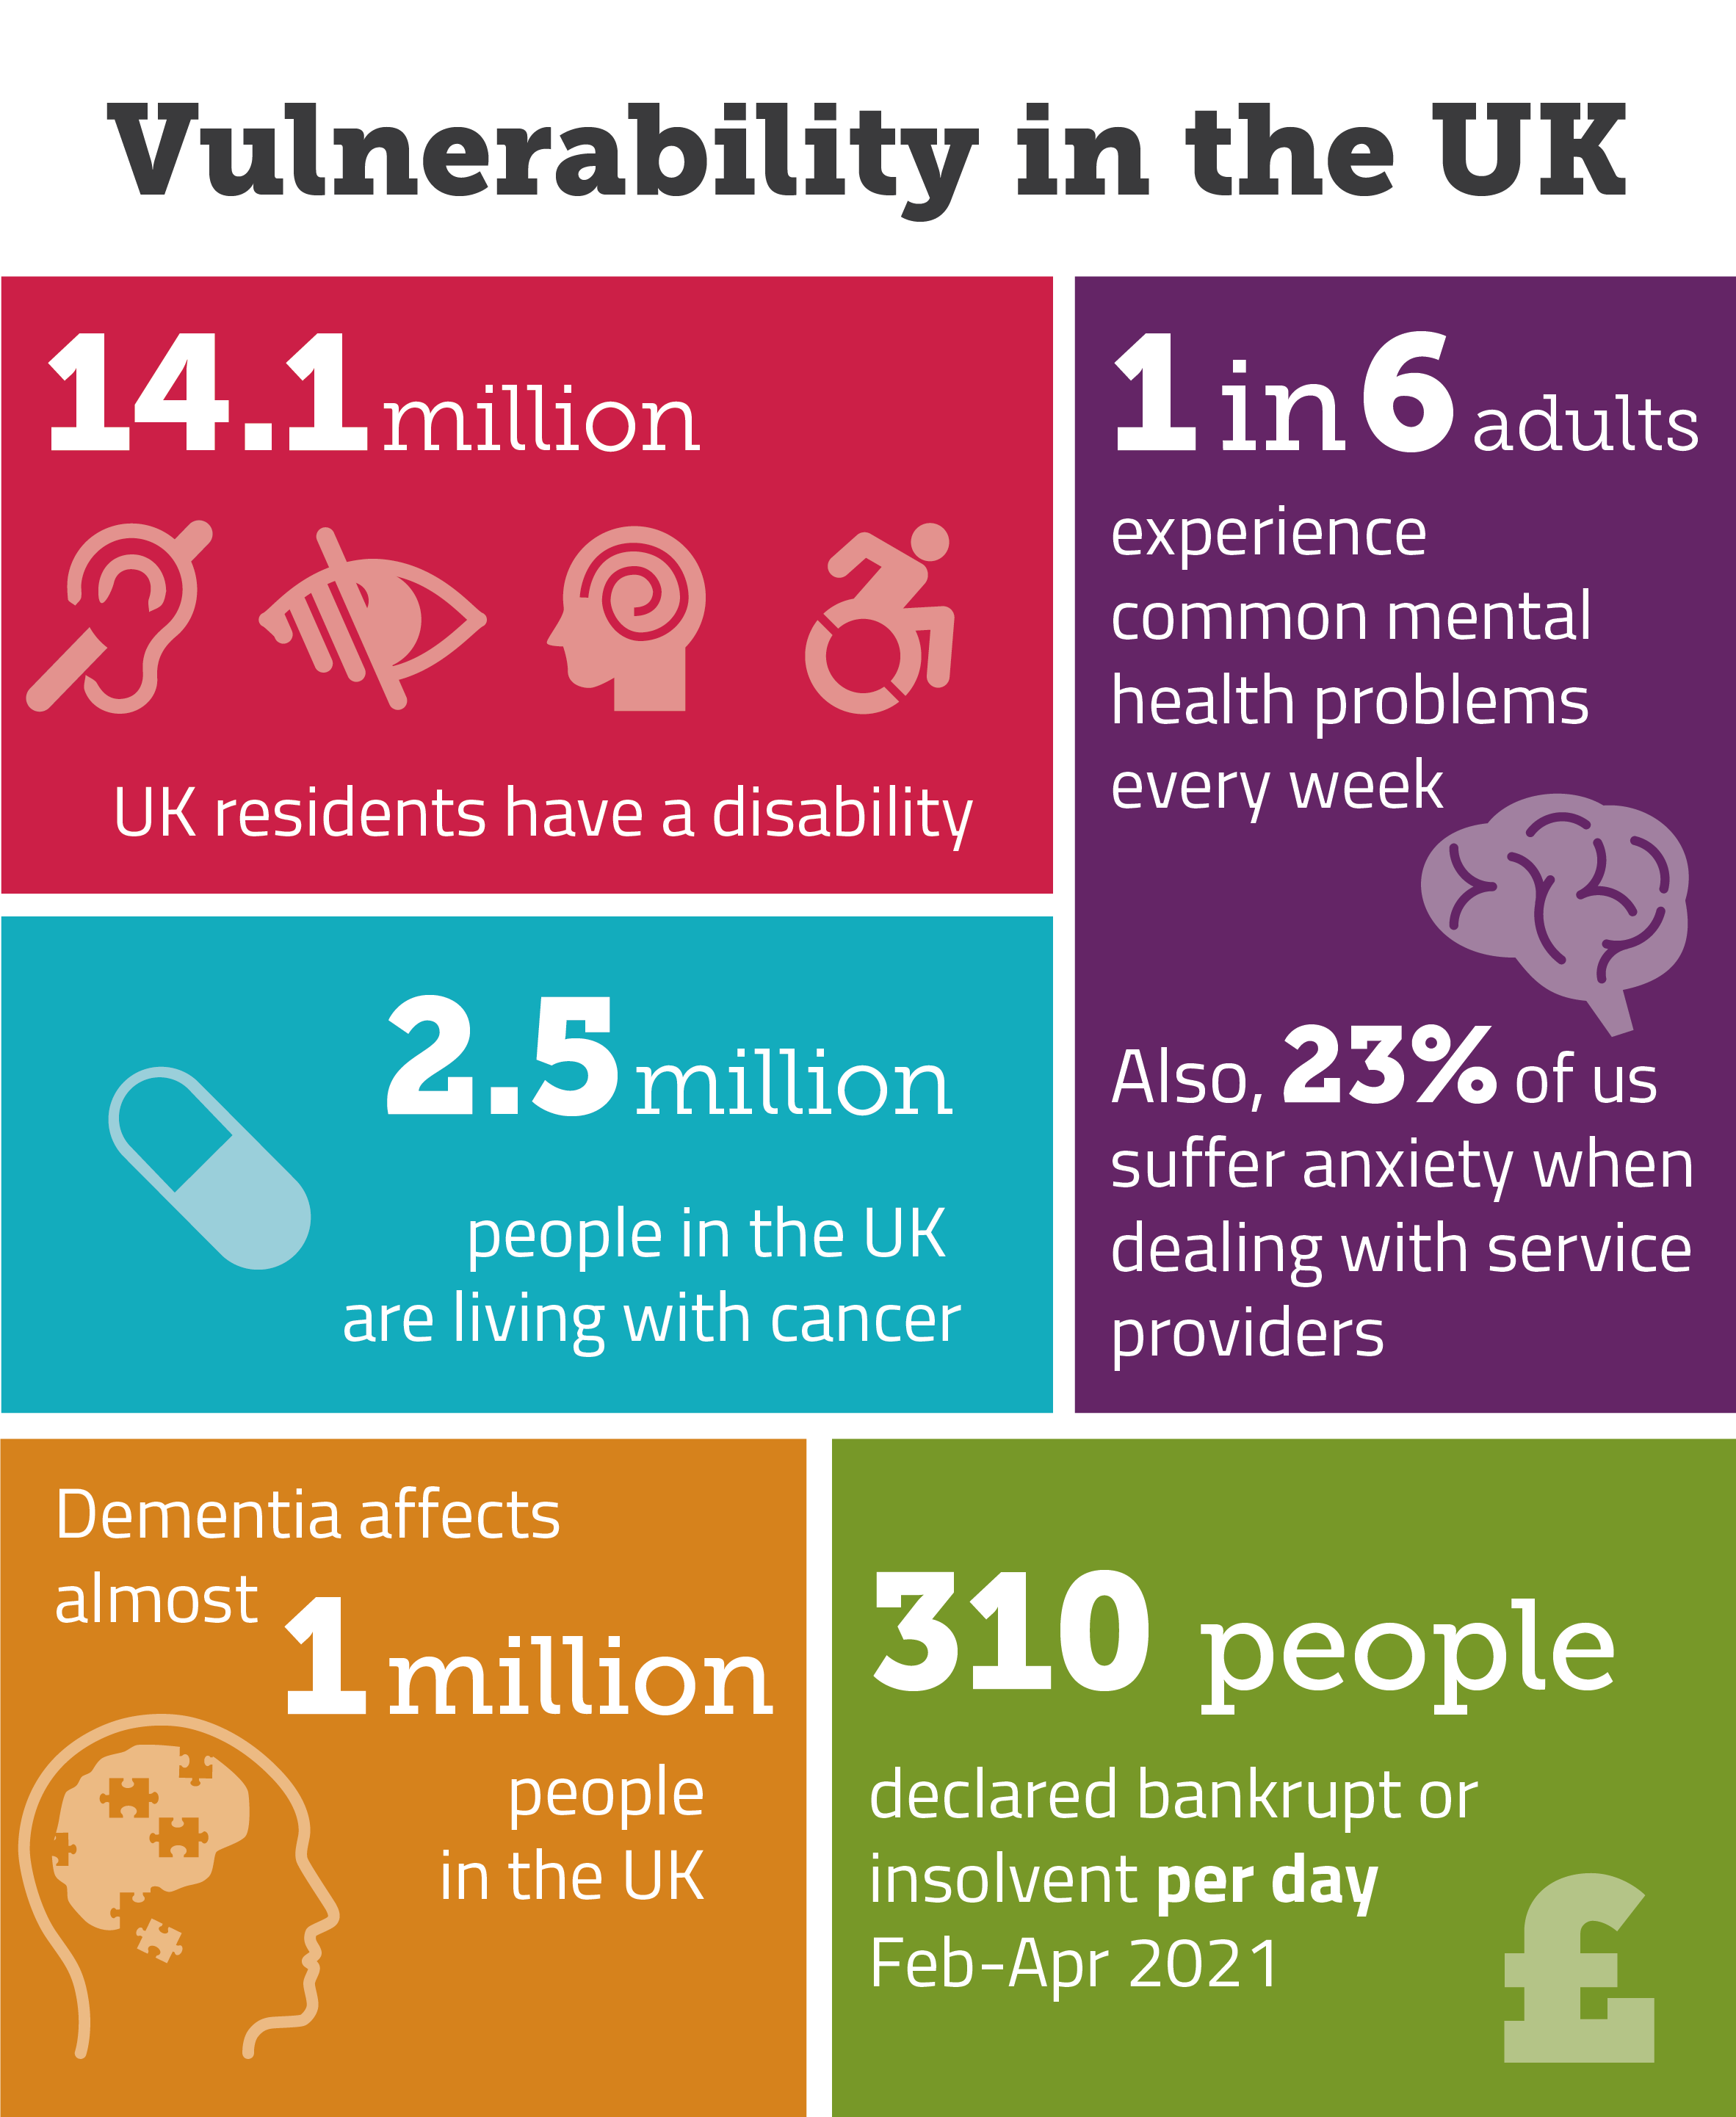 Overview of vulnerability in the UK. 14.1 million UK residents have a disability. Cancer affects 2.5 million people in the UK, while dementia affects almost 1 million. 1 in 6 UK adults experience common mental health problems every week, and almost a quarter (23%) of us suffer from anxiety when dealing with a service provider. 310 people were declared bankrupt or insolvent each day from February to April 2021. 